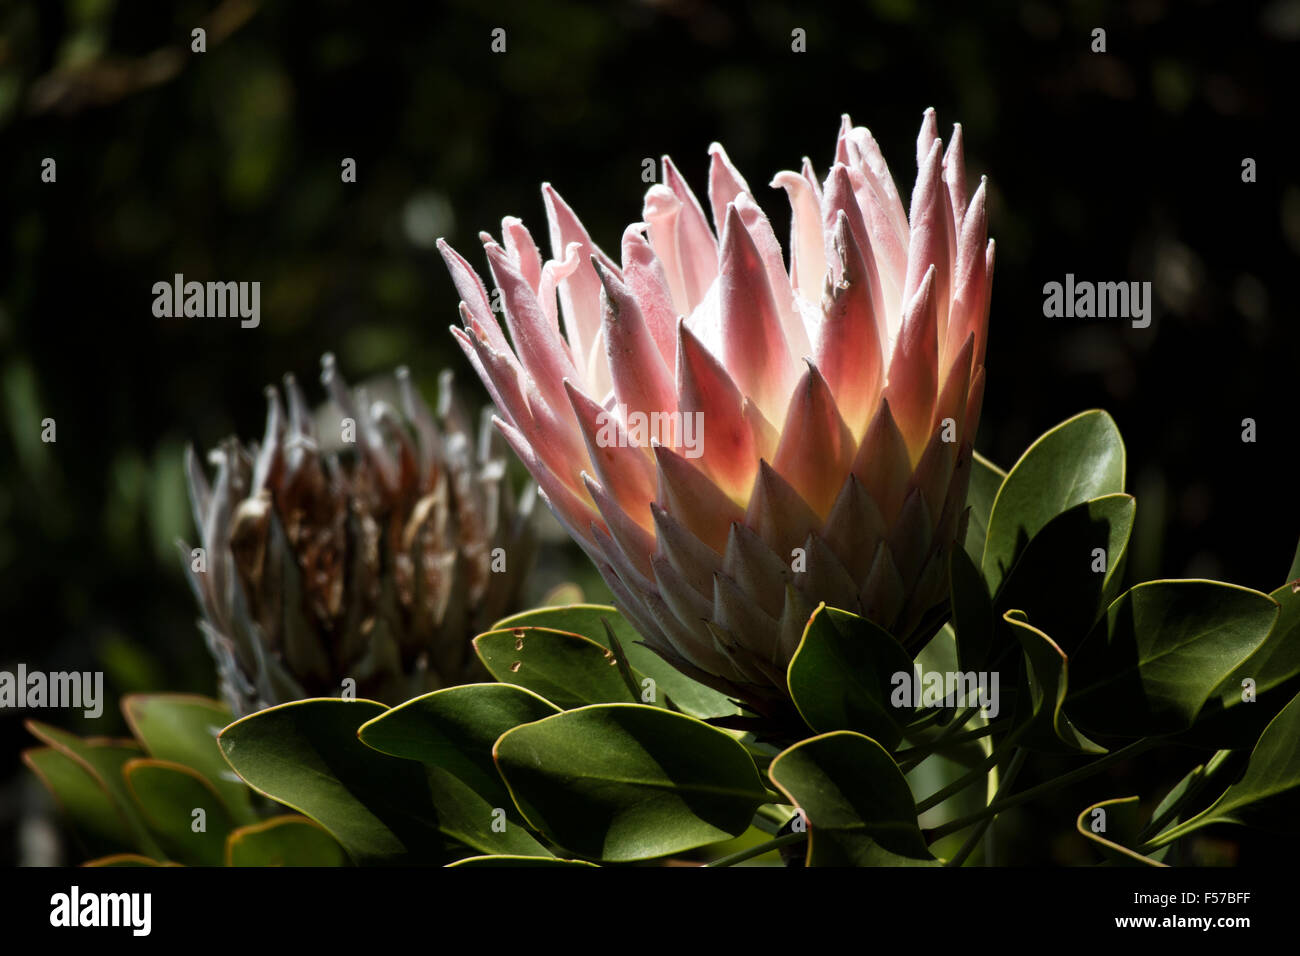 King protea the national flower of South Africa Stock Photo